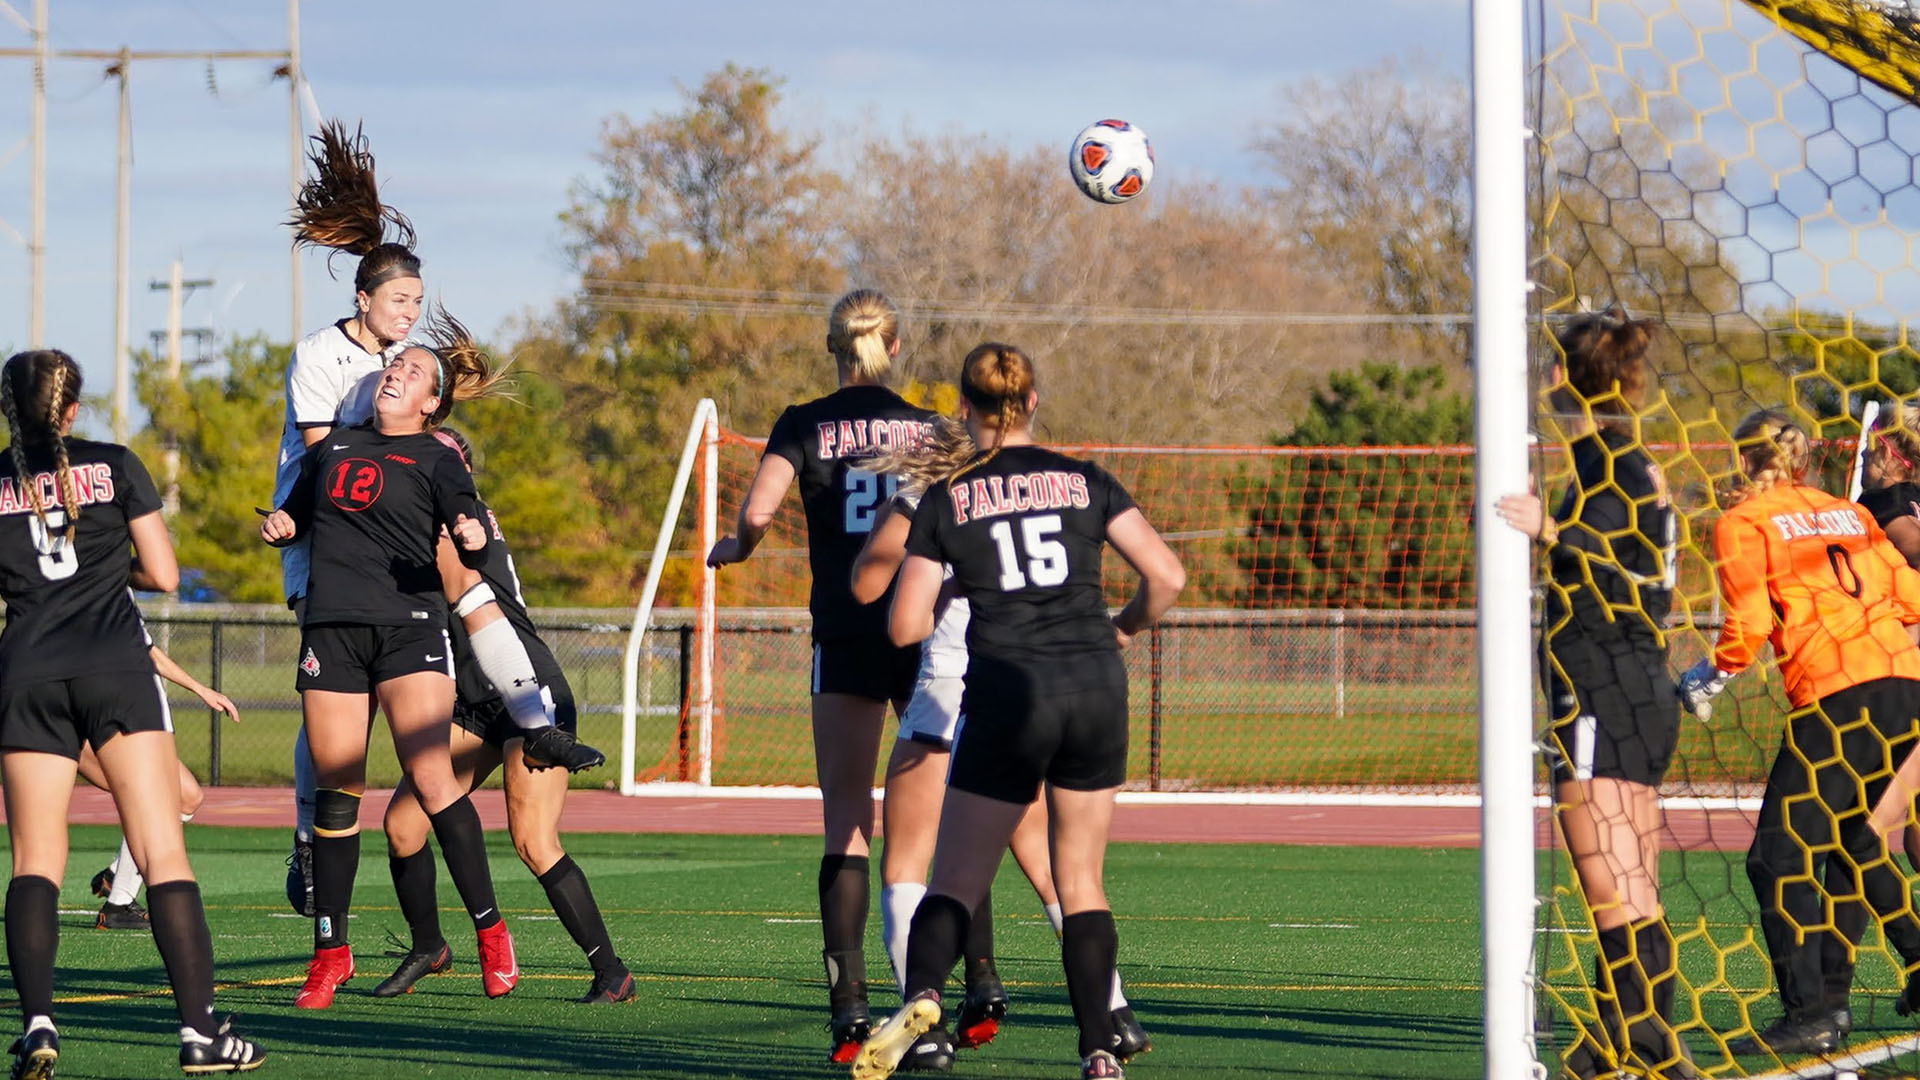 UW-Oshkosh clinched its first outright WIAC championship on Mackenzie Bennett's overtime header from four yards.